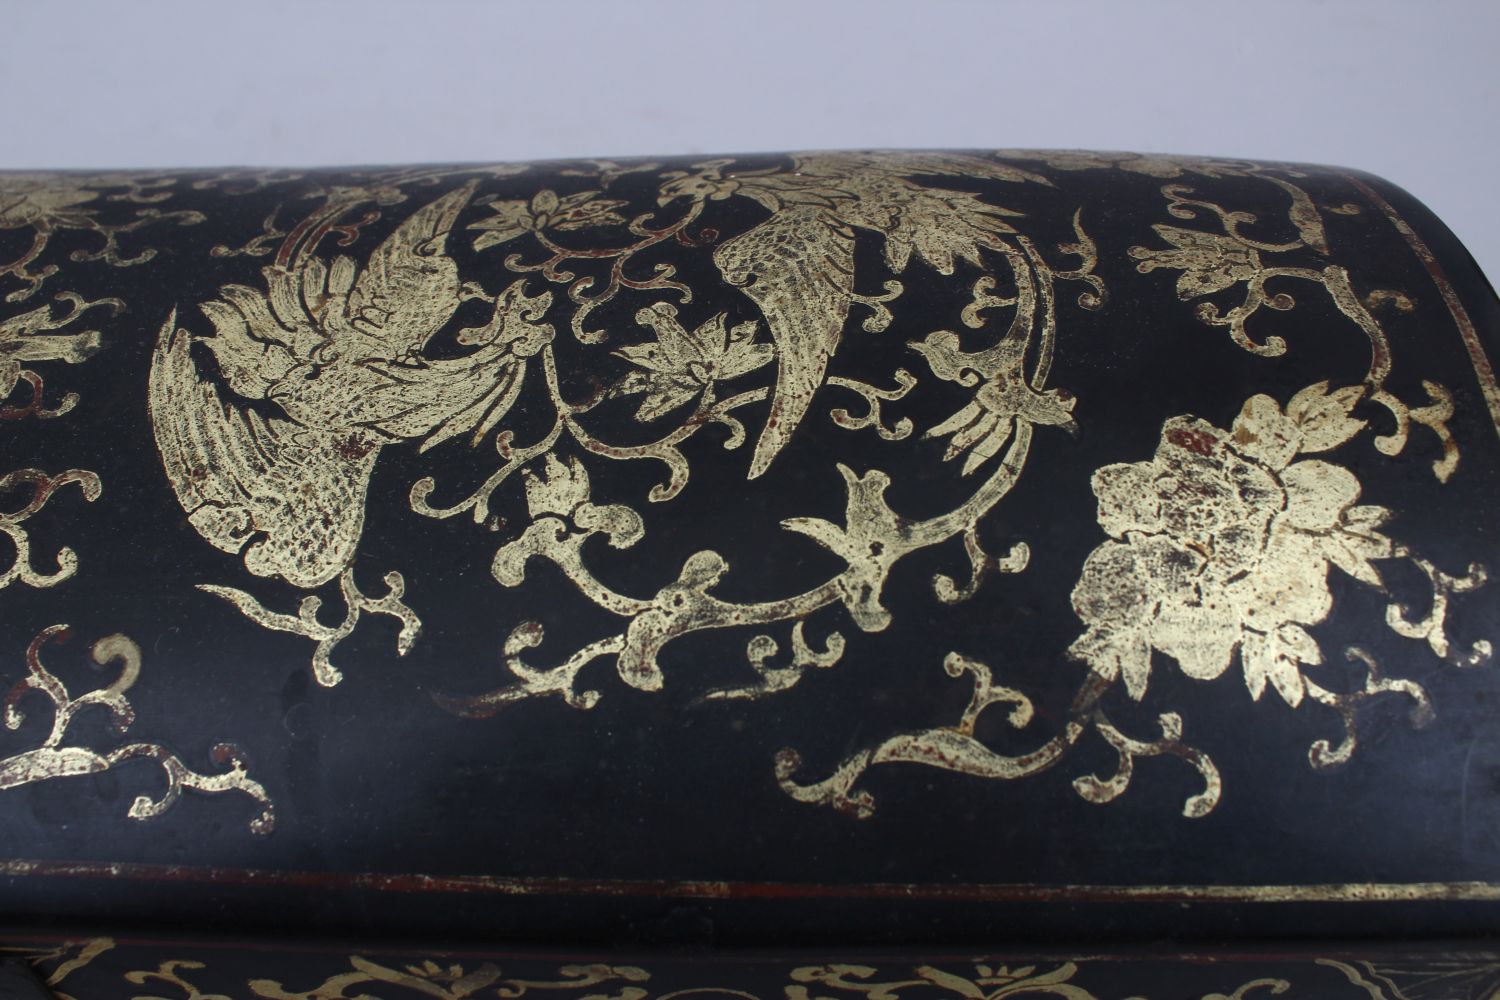 A GOOD 19TH CENTURY CHINESE LACQUER CHEST / BOX, the lacquer box with gilded decoration of dragons - Image 6 of 12